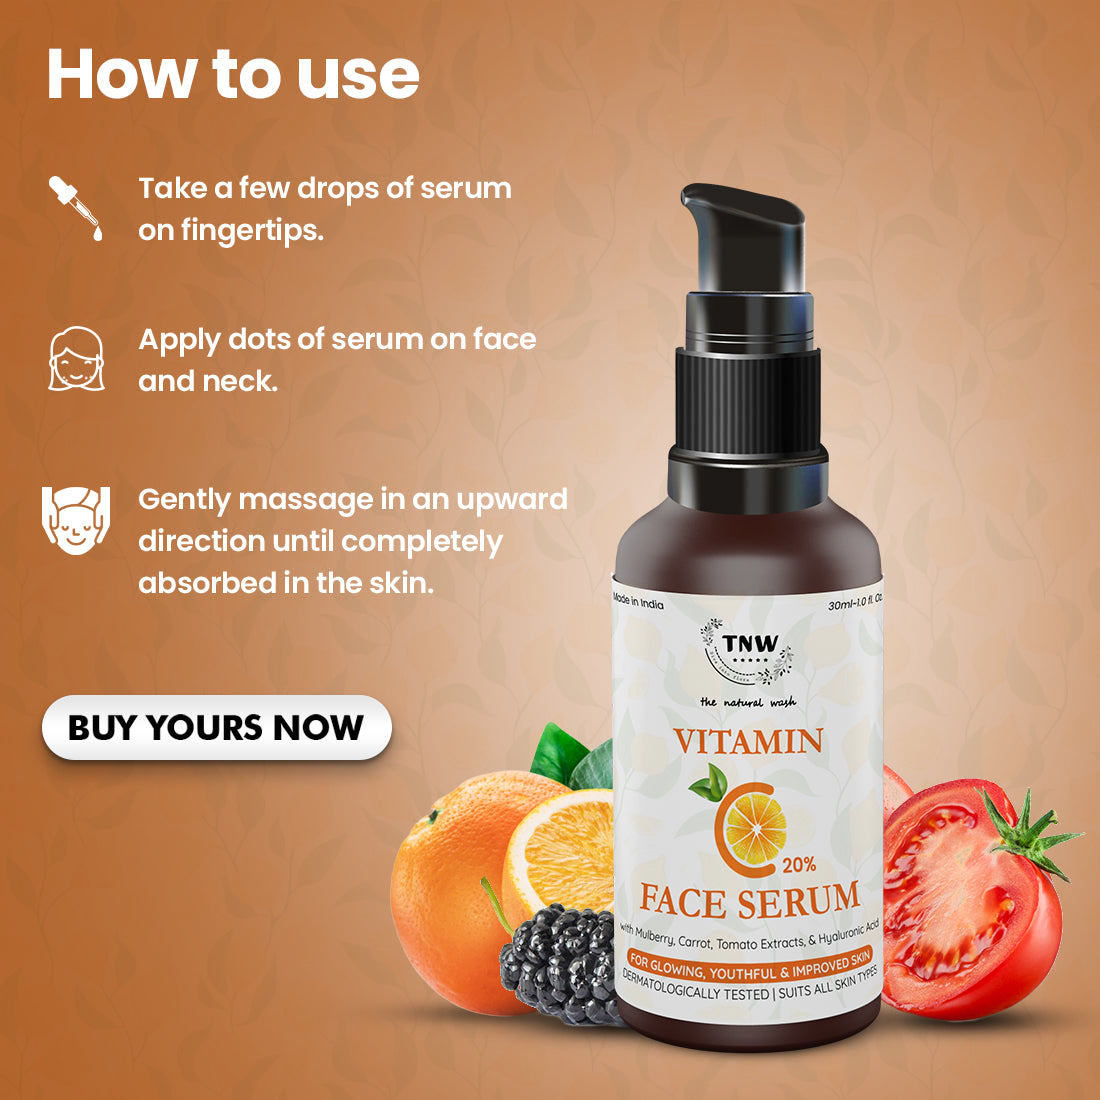 How to use Vitamin C Face Serum